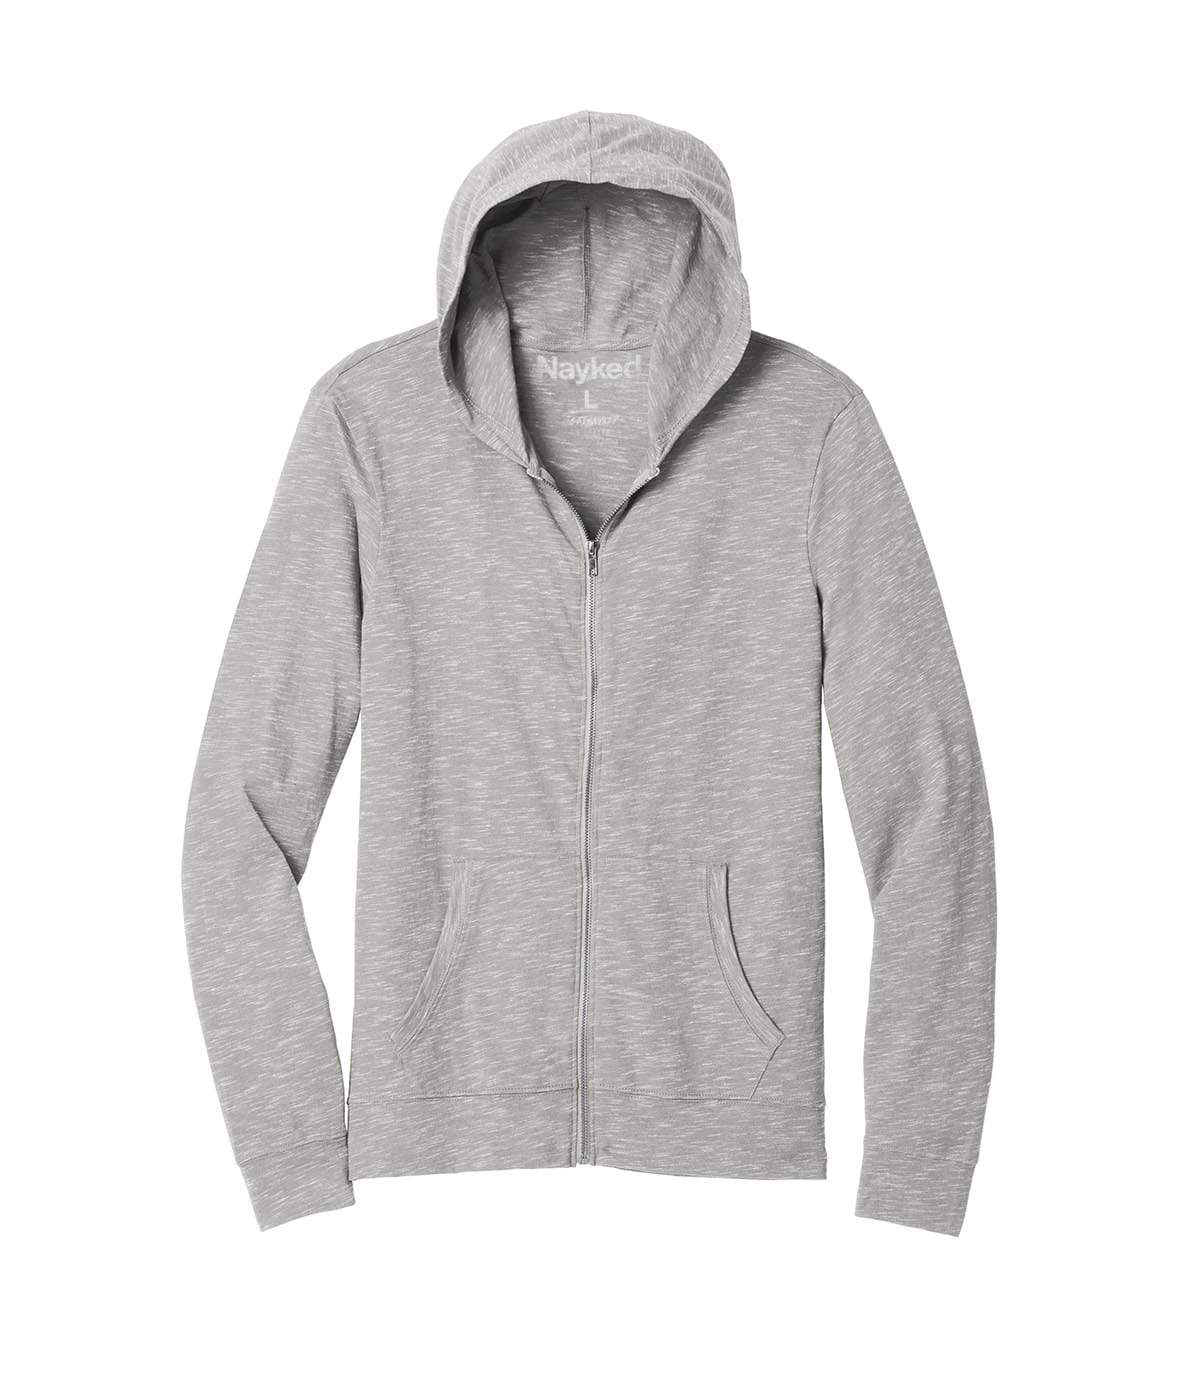 Nayked Men's Ridiculously Soft Lightweight Full-Zip Hoodie, Size: 3XL, Gray